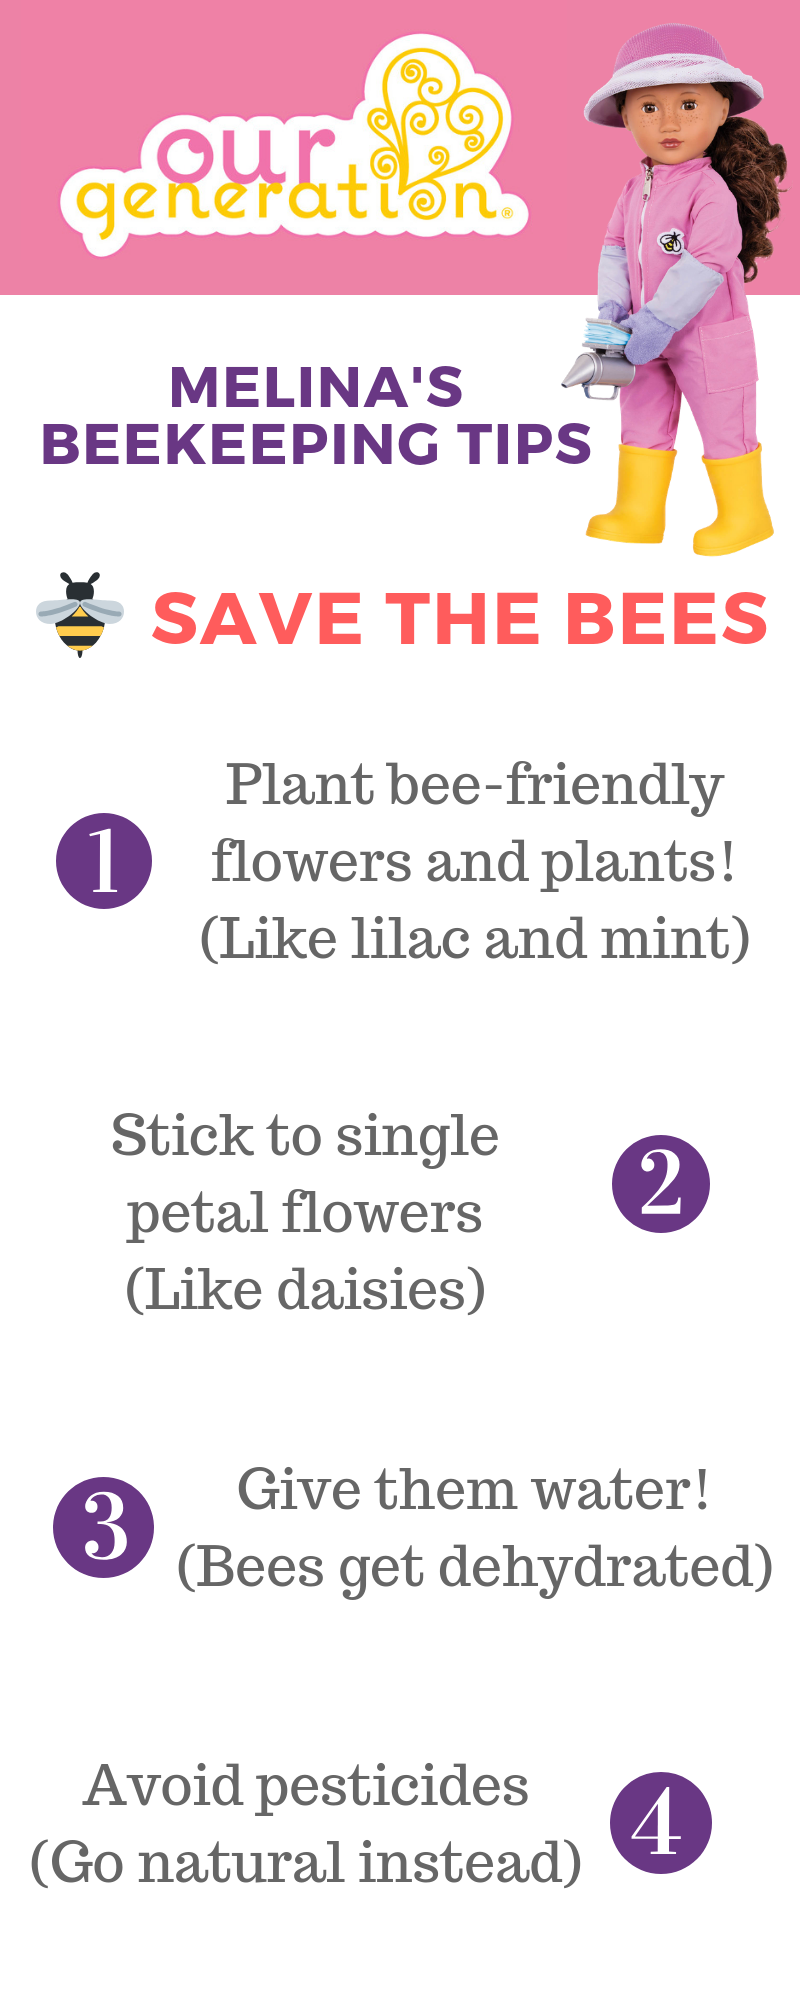 Save the Bees with Melina!